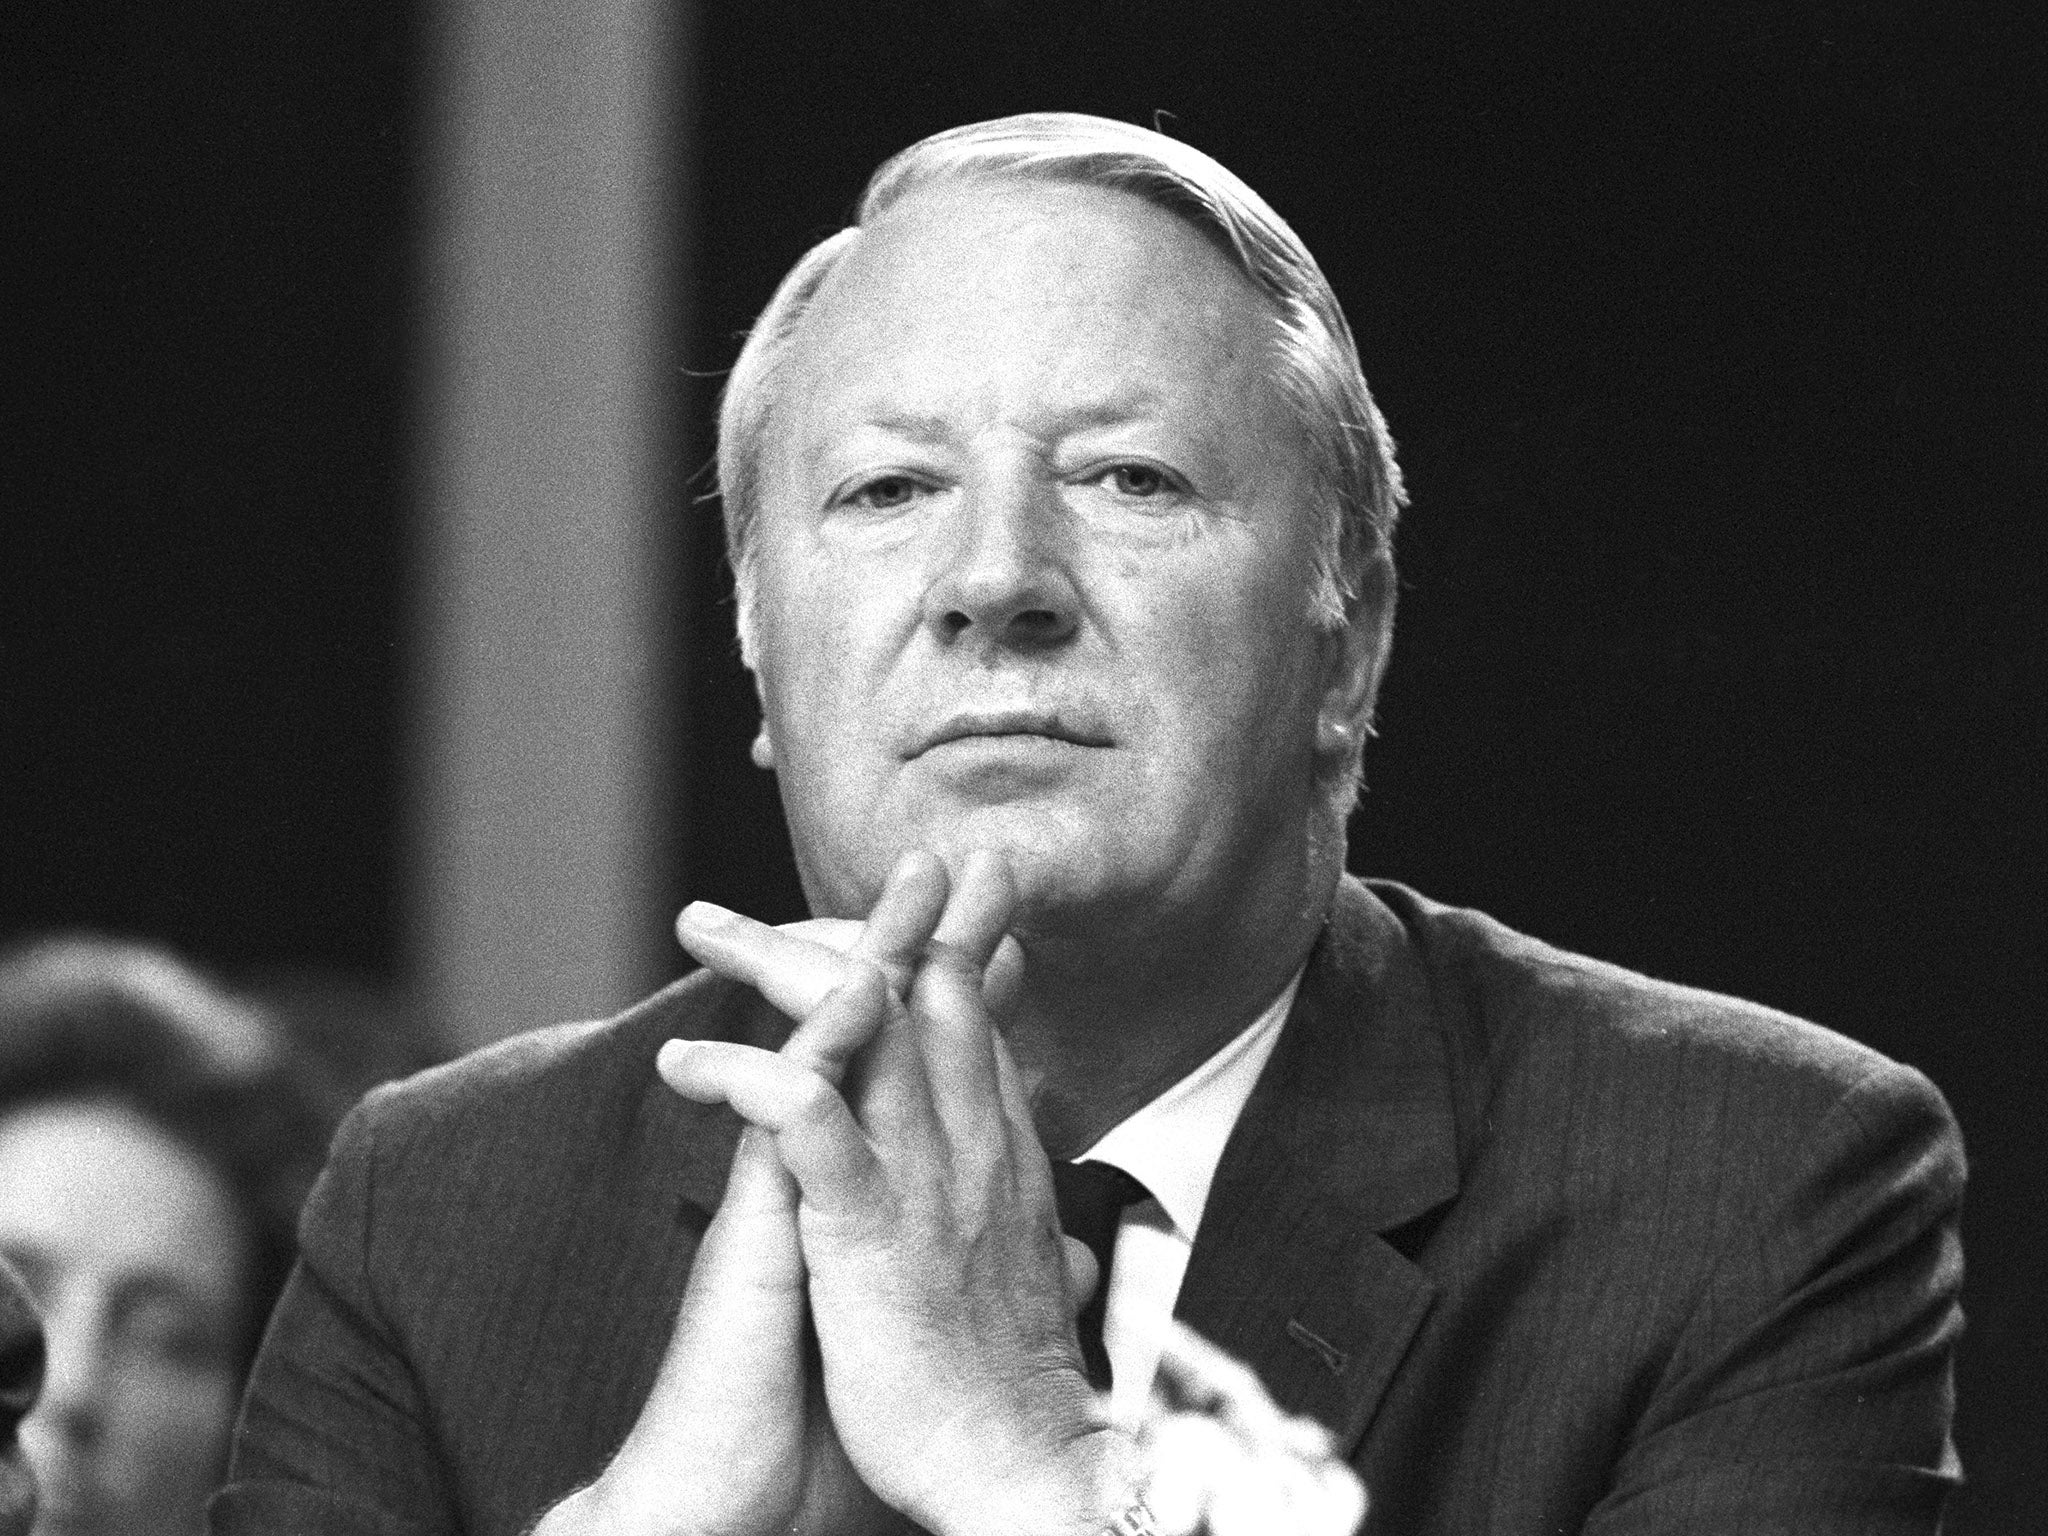 Edward Heath himself had extensive business interests in China